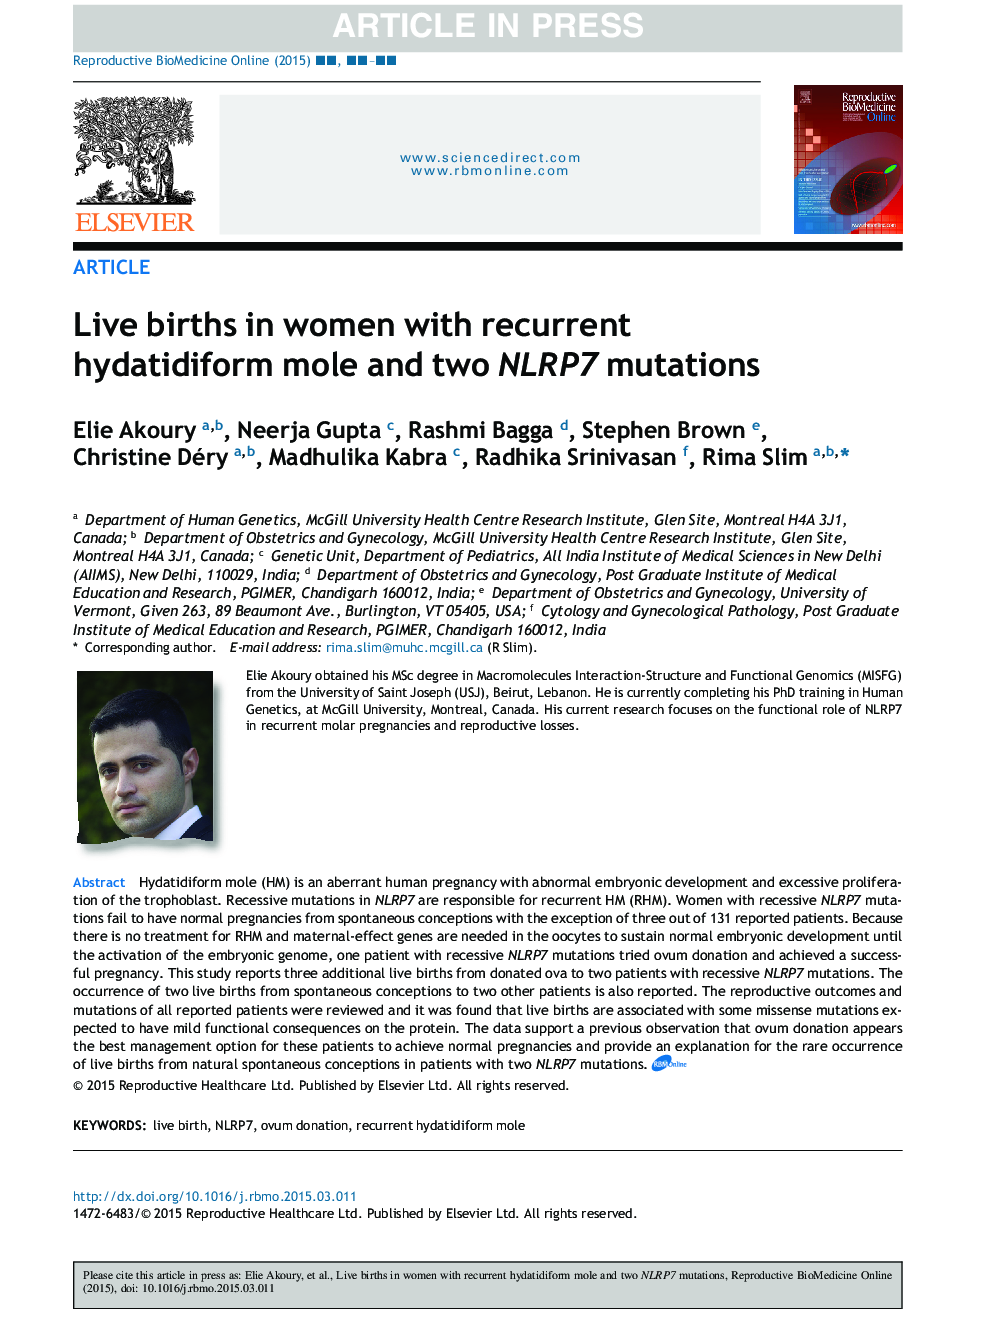 Live births in women with recurrent hydatidiform mole and two NLRP7 mutations